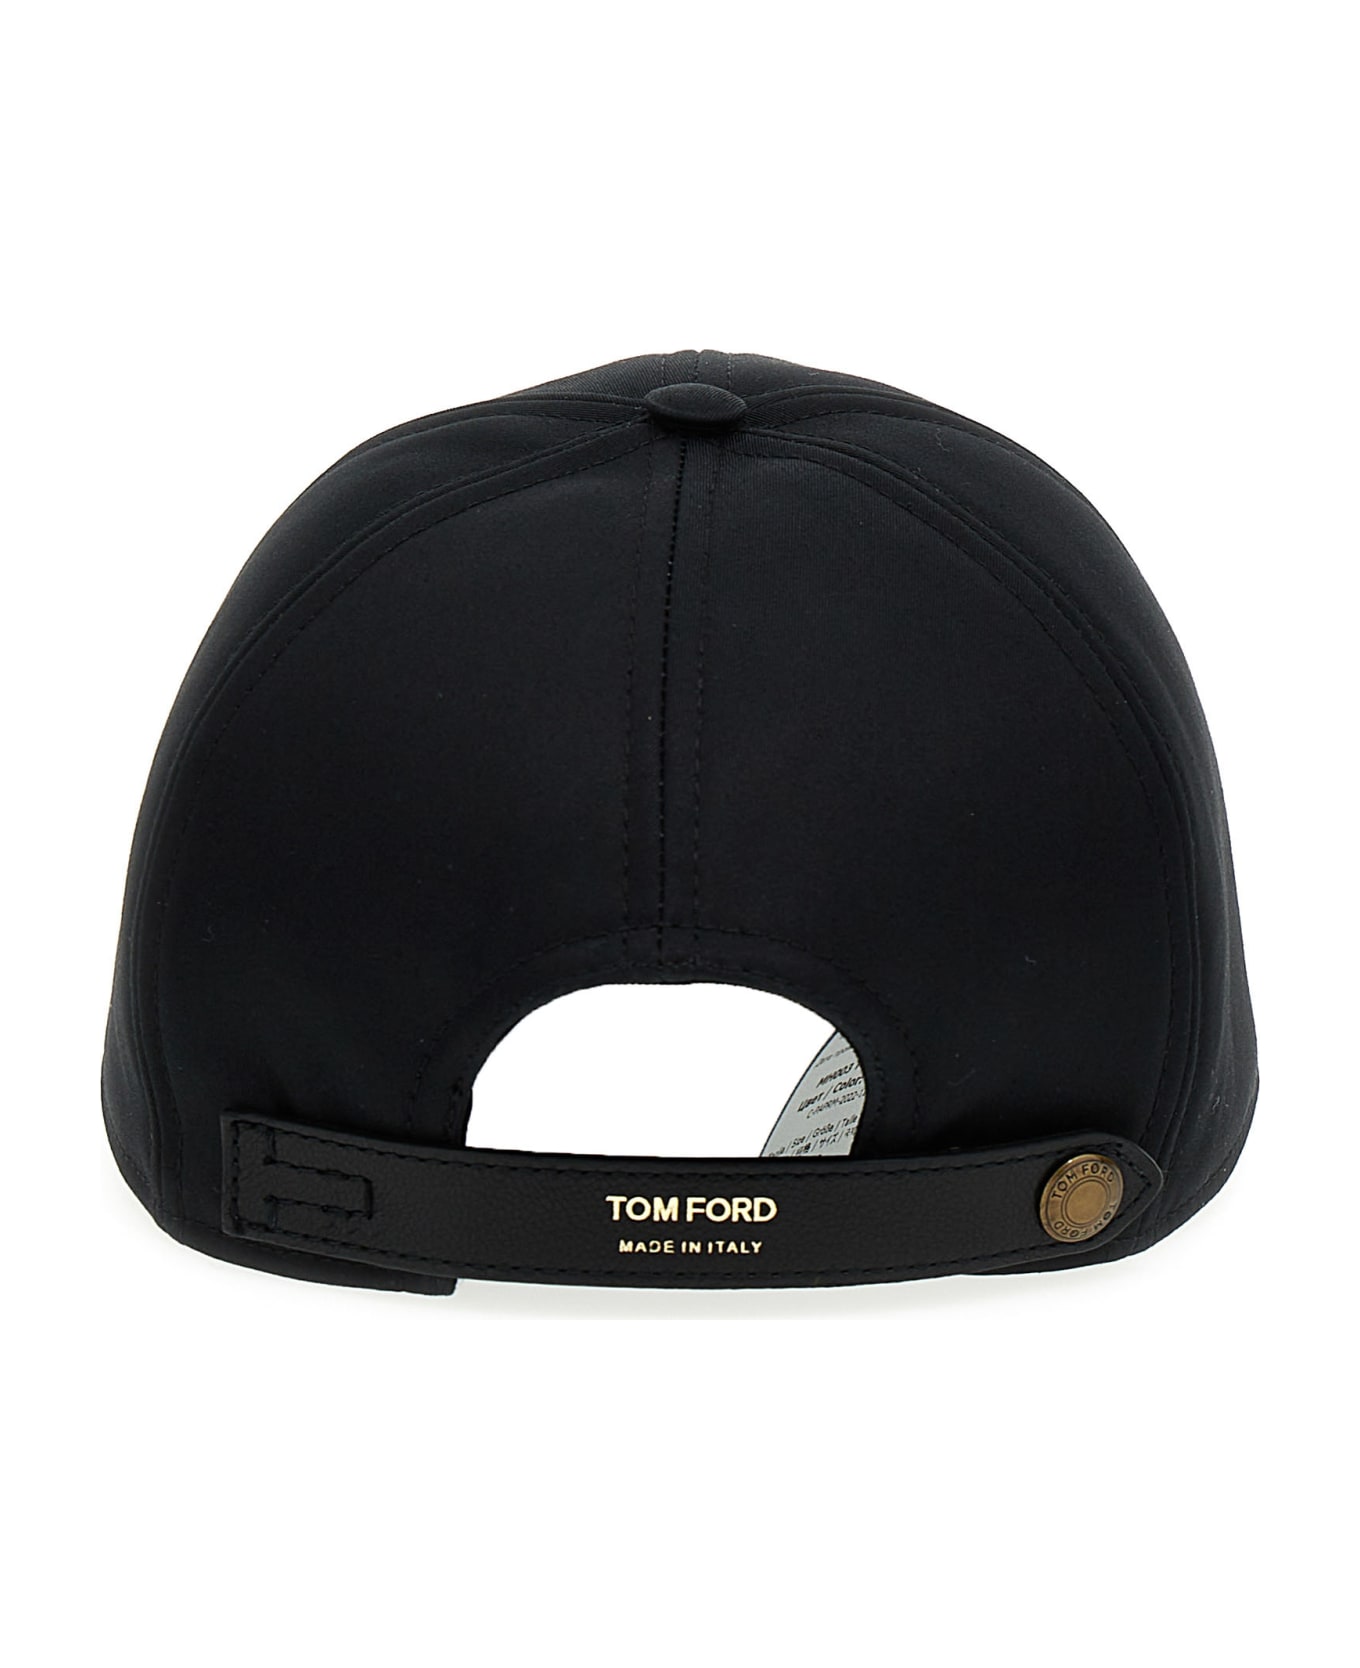 Tom Ford Logo Embroidery Cap - Black  